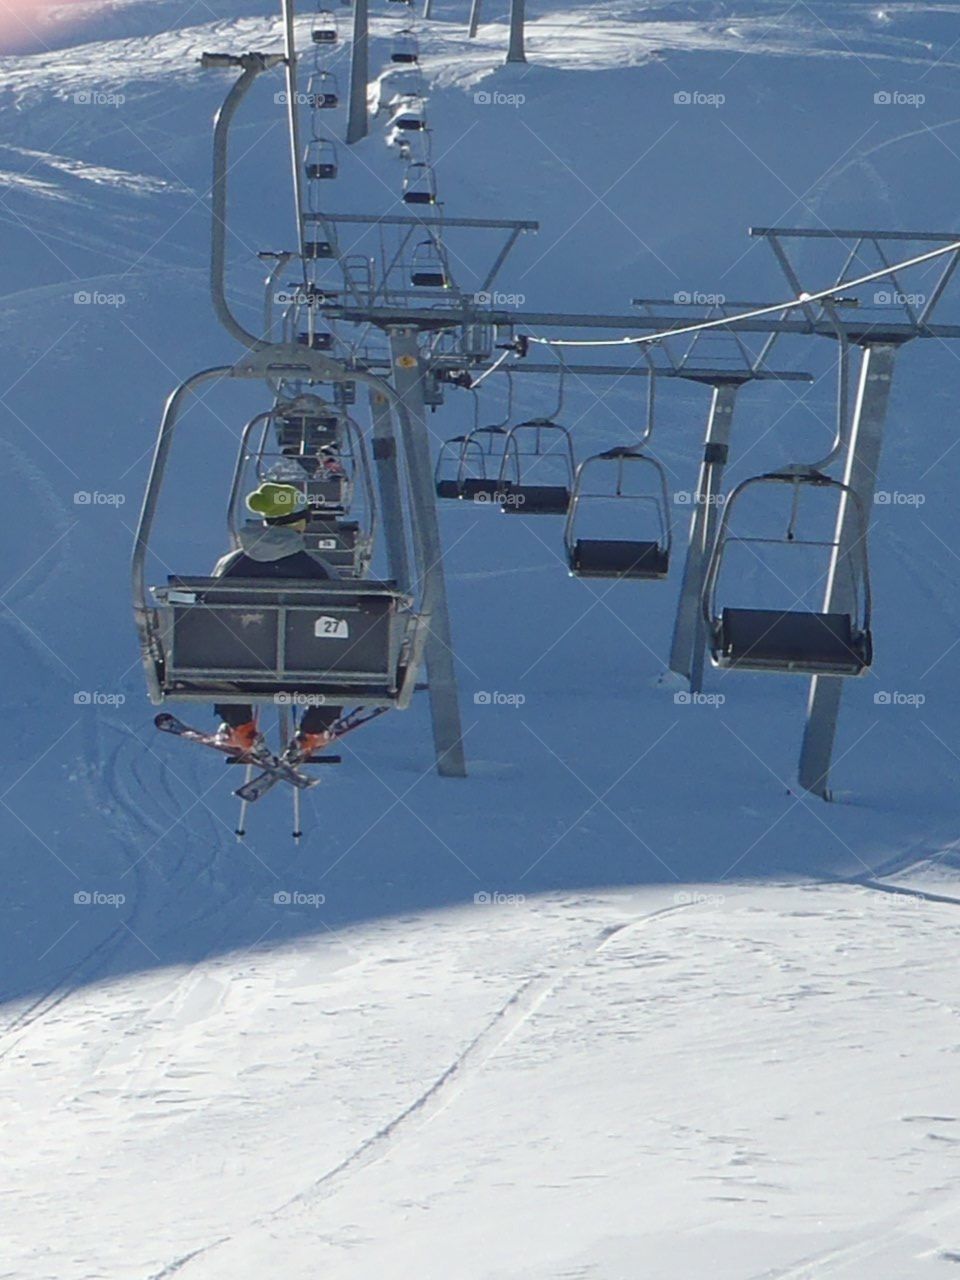 The Chairlift